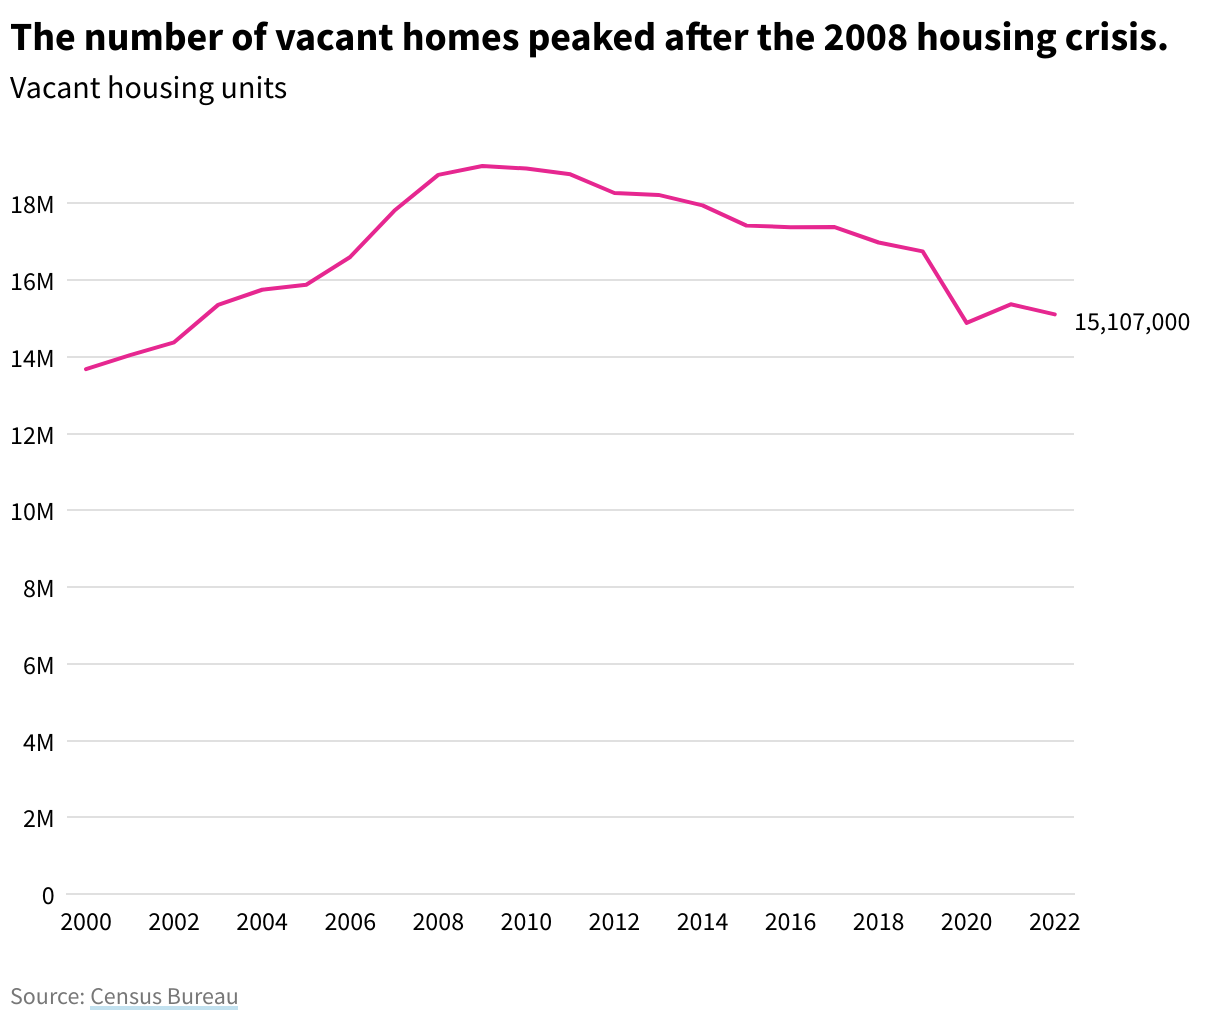 Line chart showing the amount of vacant homes in the US over time with a peak in 2009 following the housing crisis. 